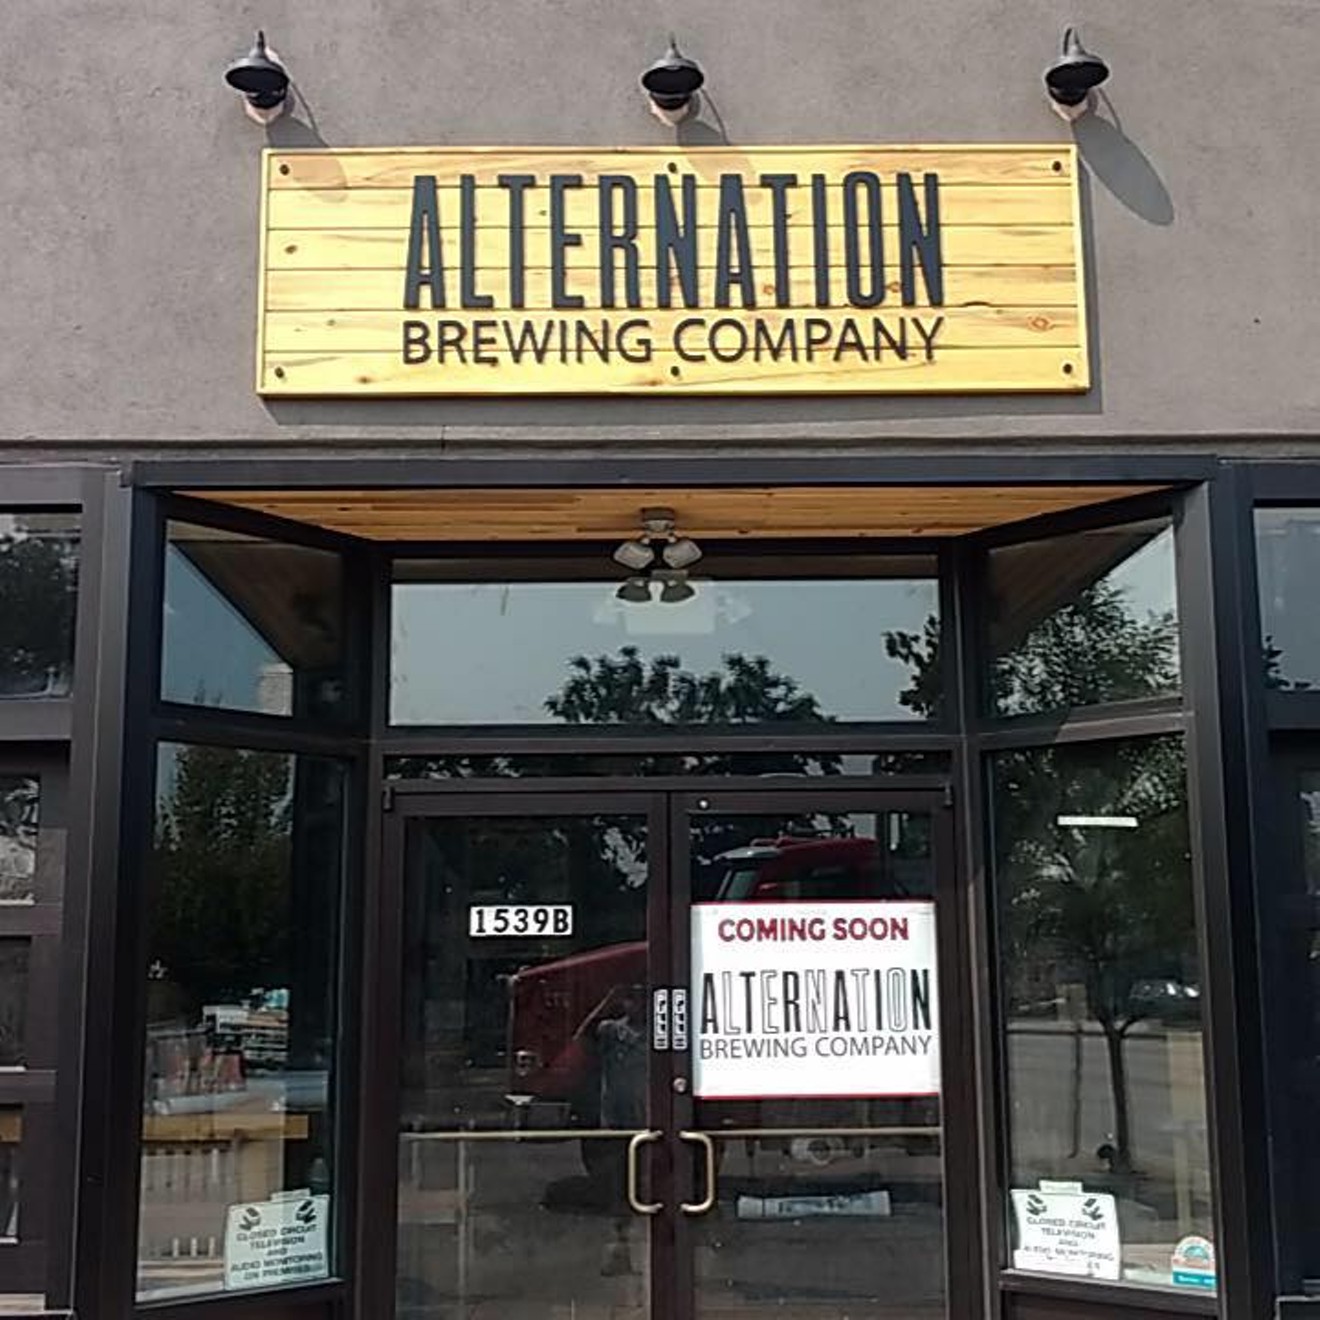 Alternation Brewing opens its doors at noon on Saturday.